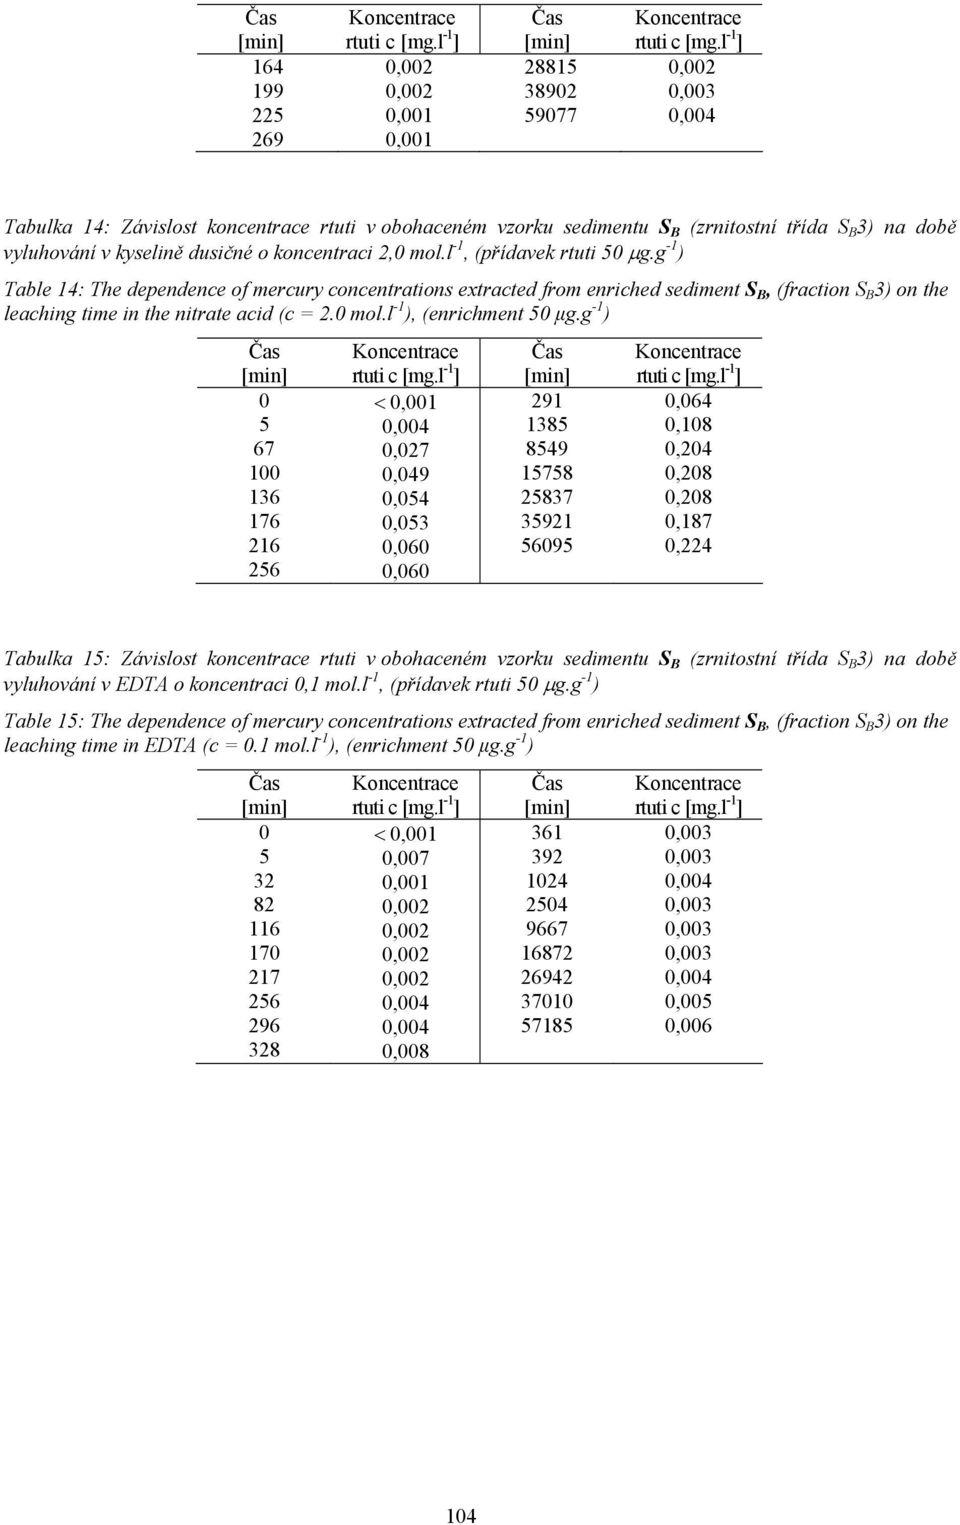 l -1, (přídavek rtuti 50 µg.g -1 ) Table 14: The dependence of mercury concentrations extracted from enriched sediment S B, (fraction S B 3) on the leaching time in the nitrate acid (c = 2.0 mol.